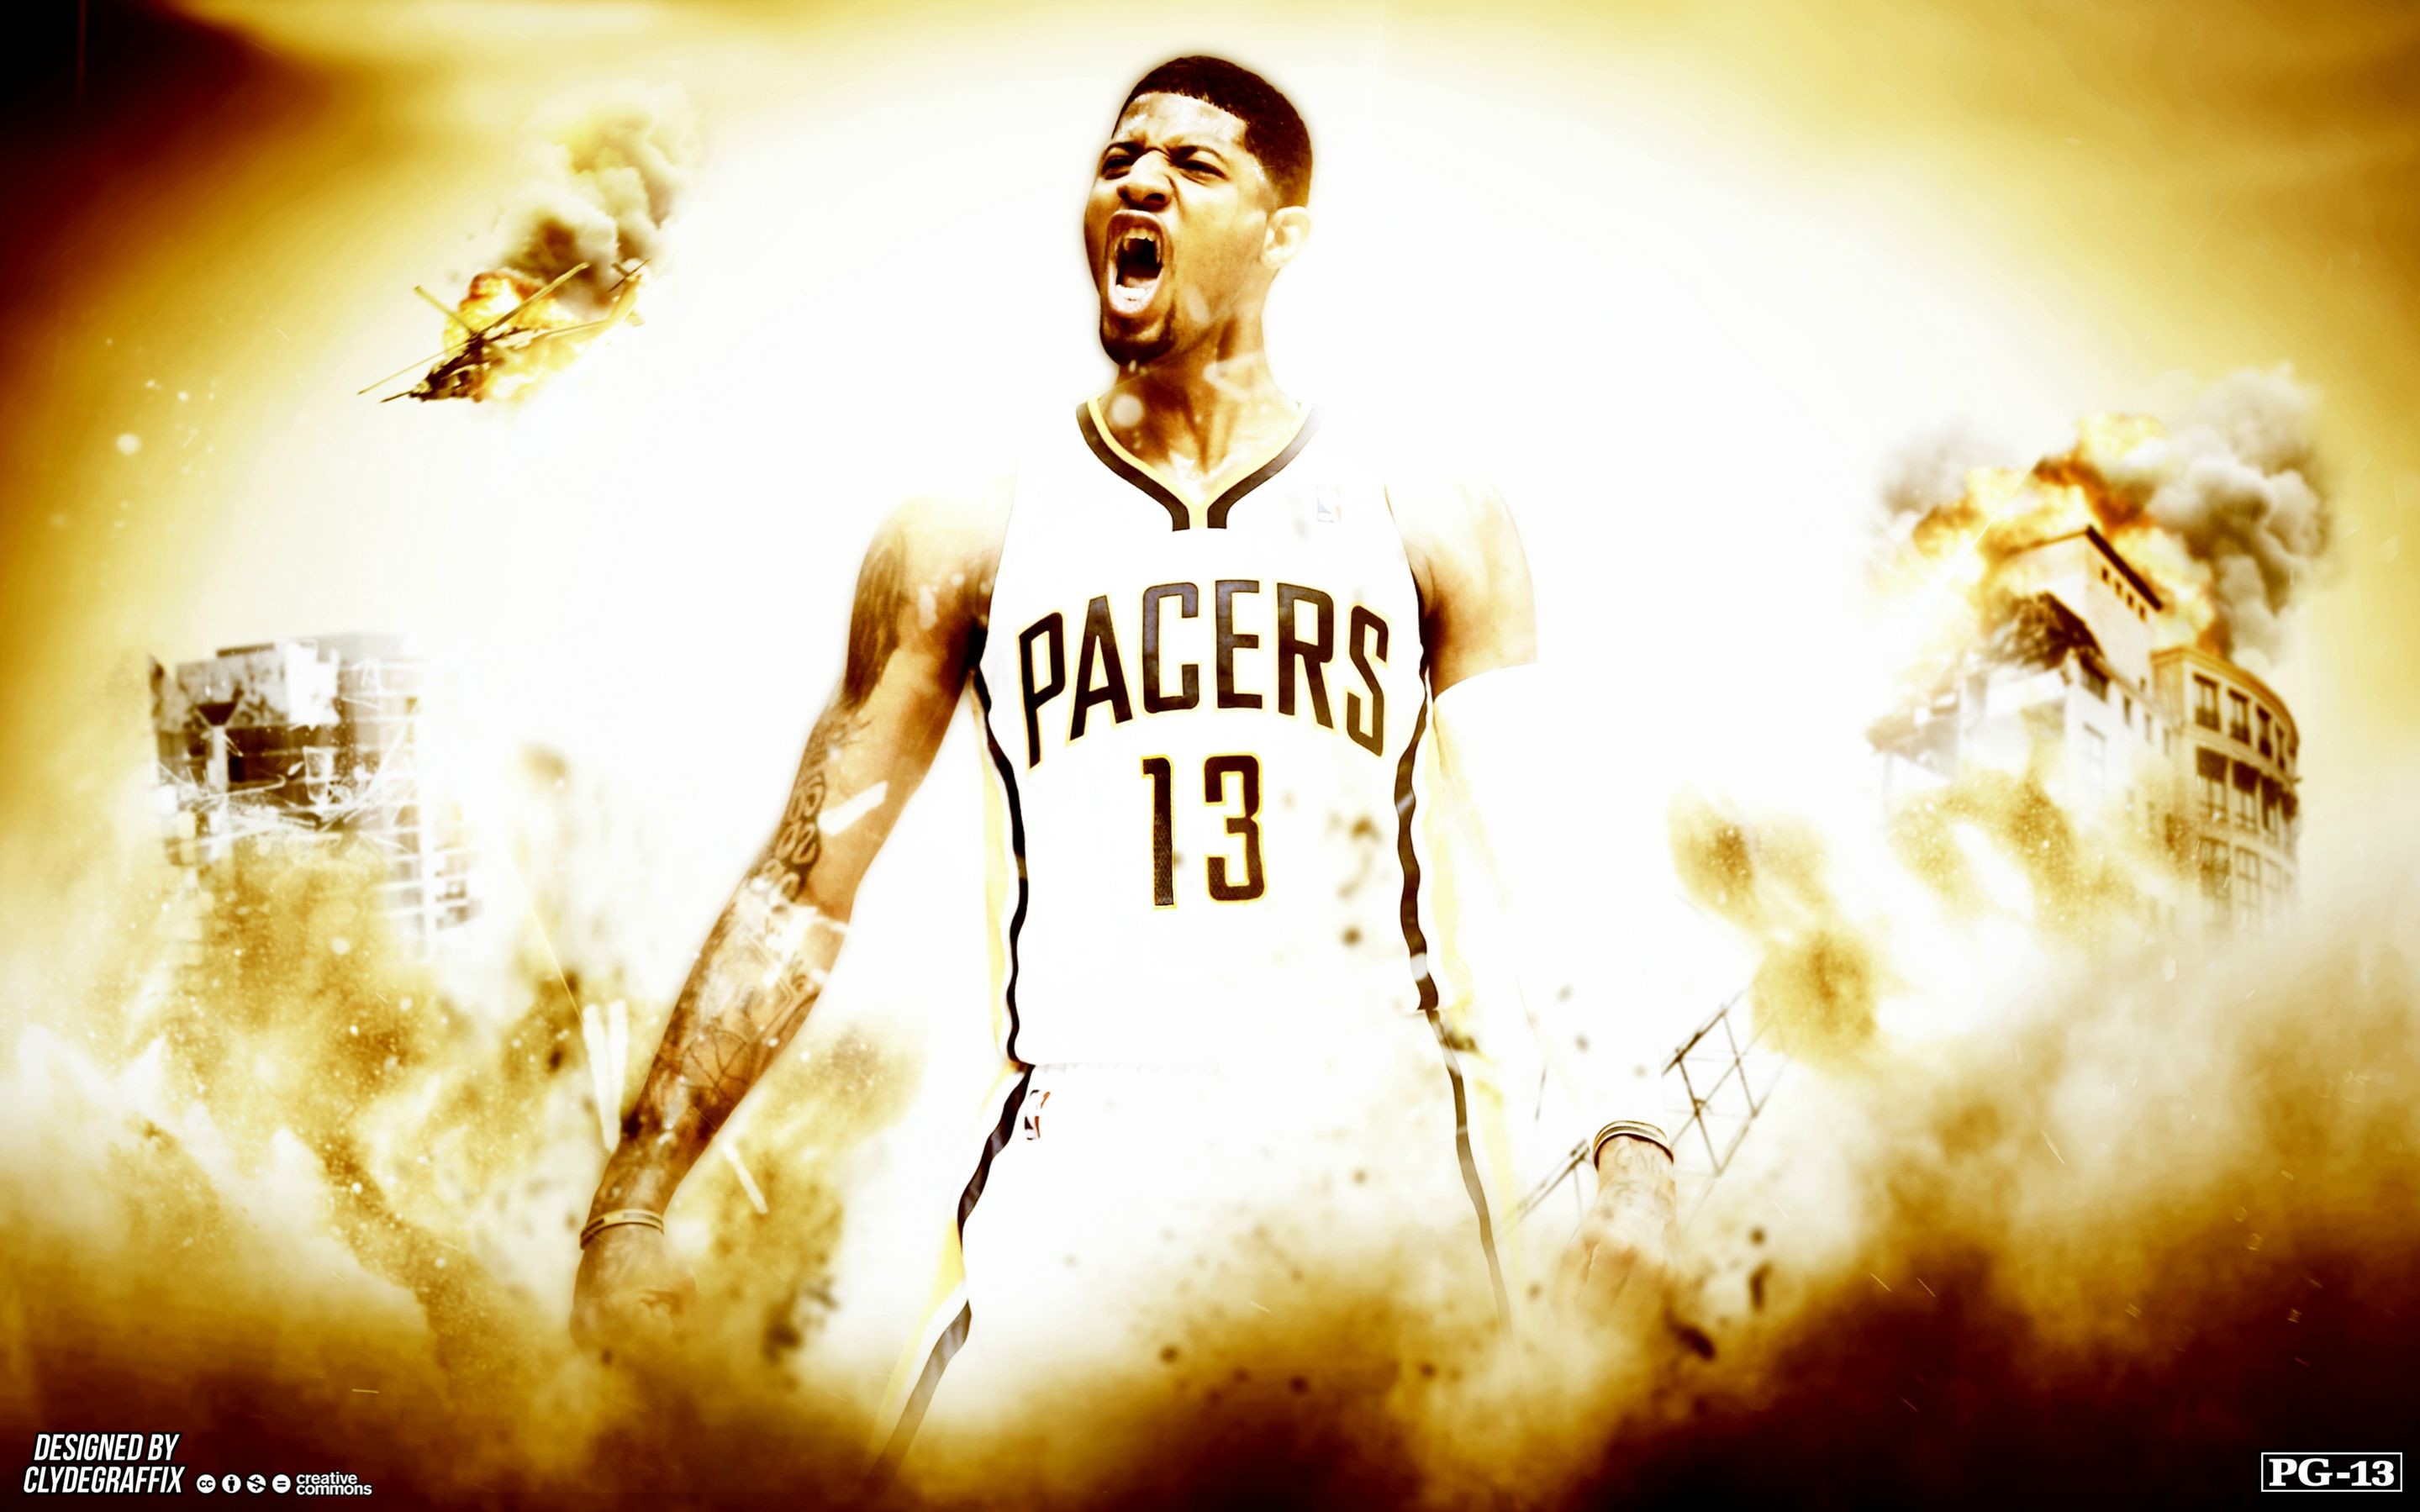 2879x1799 Paul George for PC & Mac, Laptop, Tablet, Mobile Phone